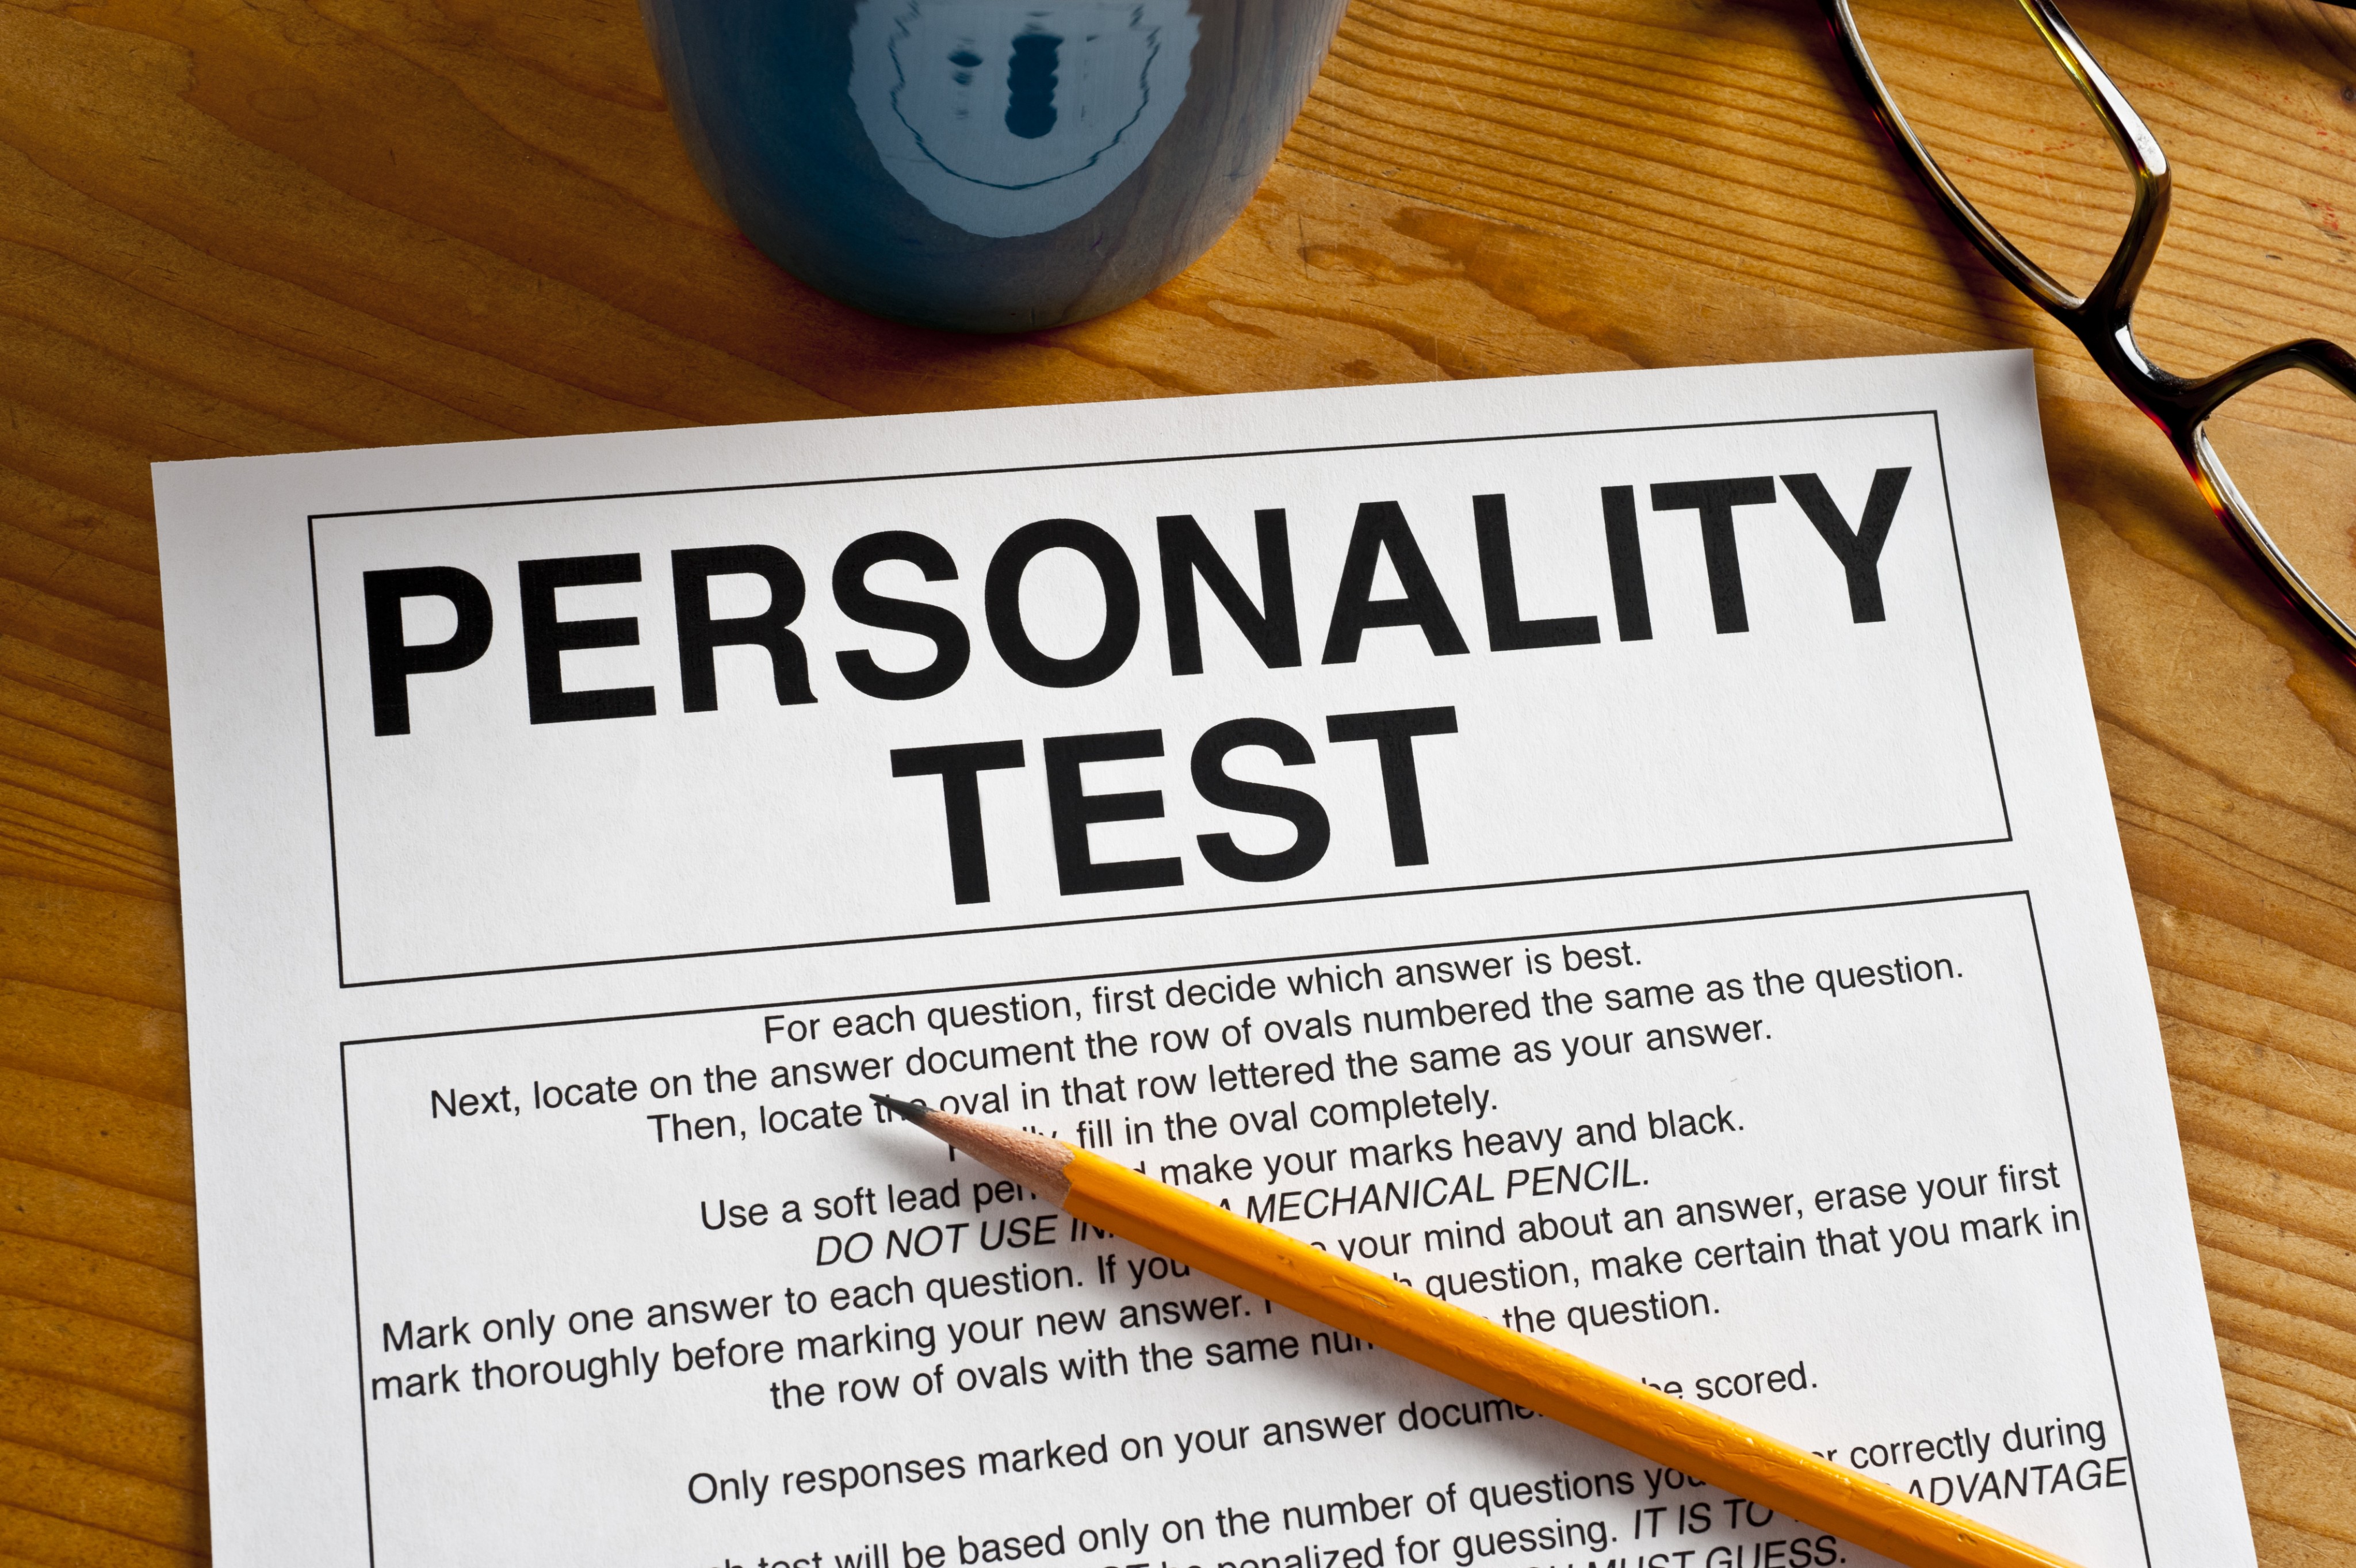 BE WARY OF FREE PERSONALITY ASSESSMENTS